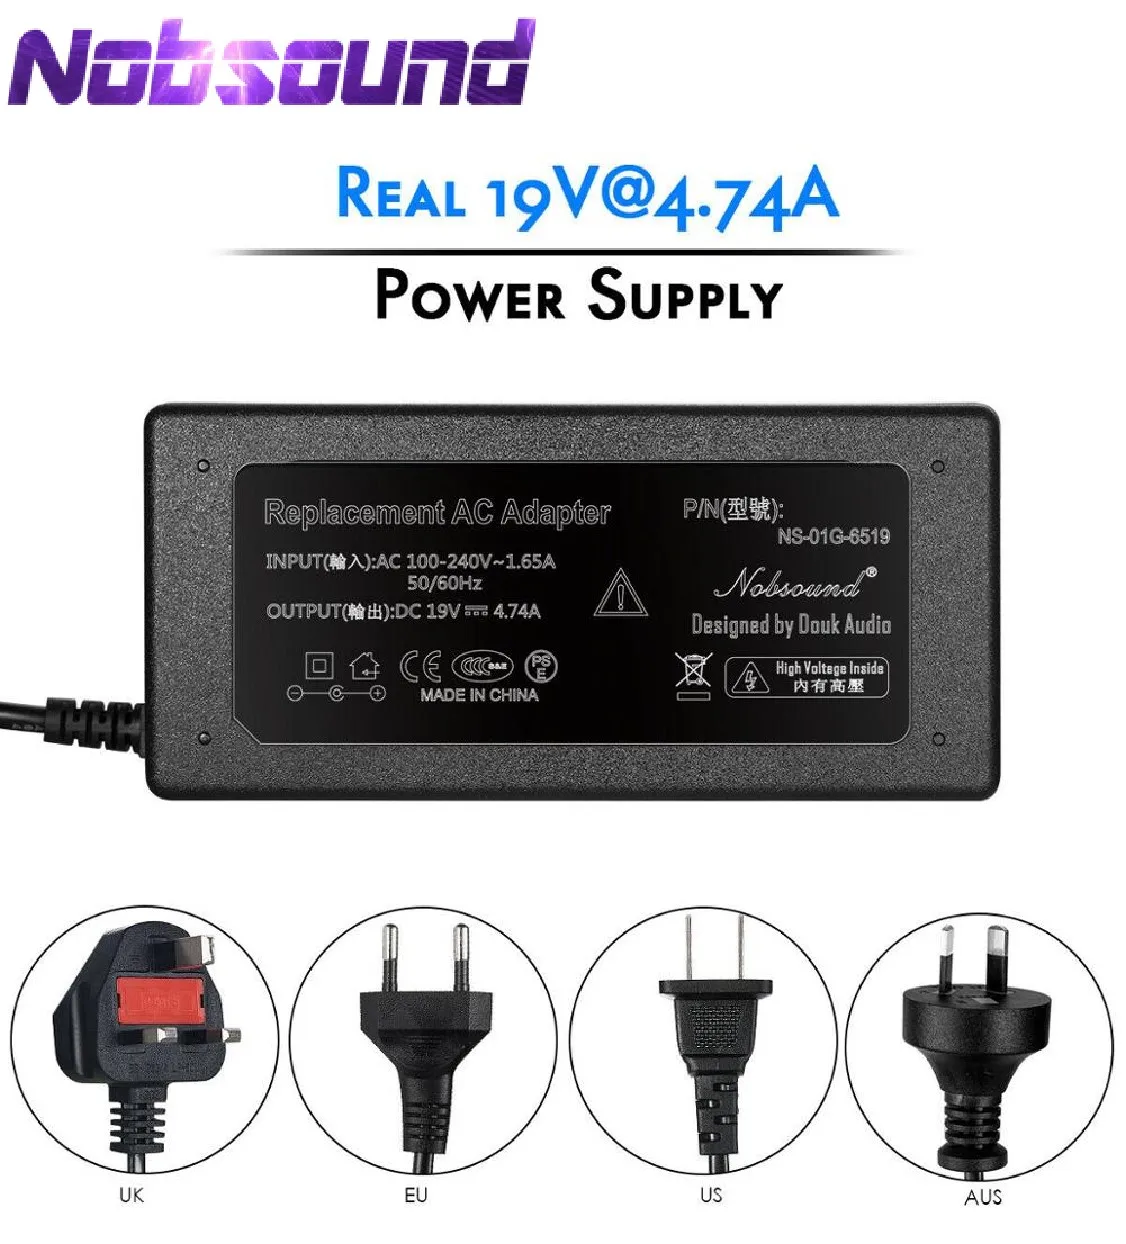 Nobsound DC 19V 4.74A Power Adapter Universal Power Supply Charger Input 100-240V 50/60Hz For Digital Amplifiers